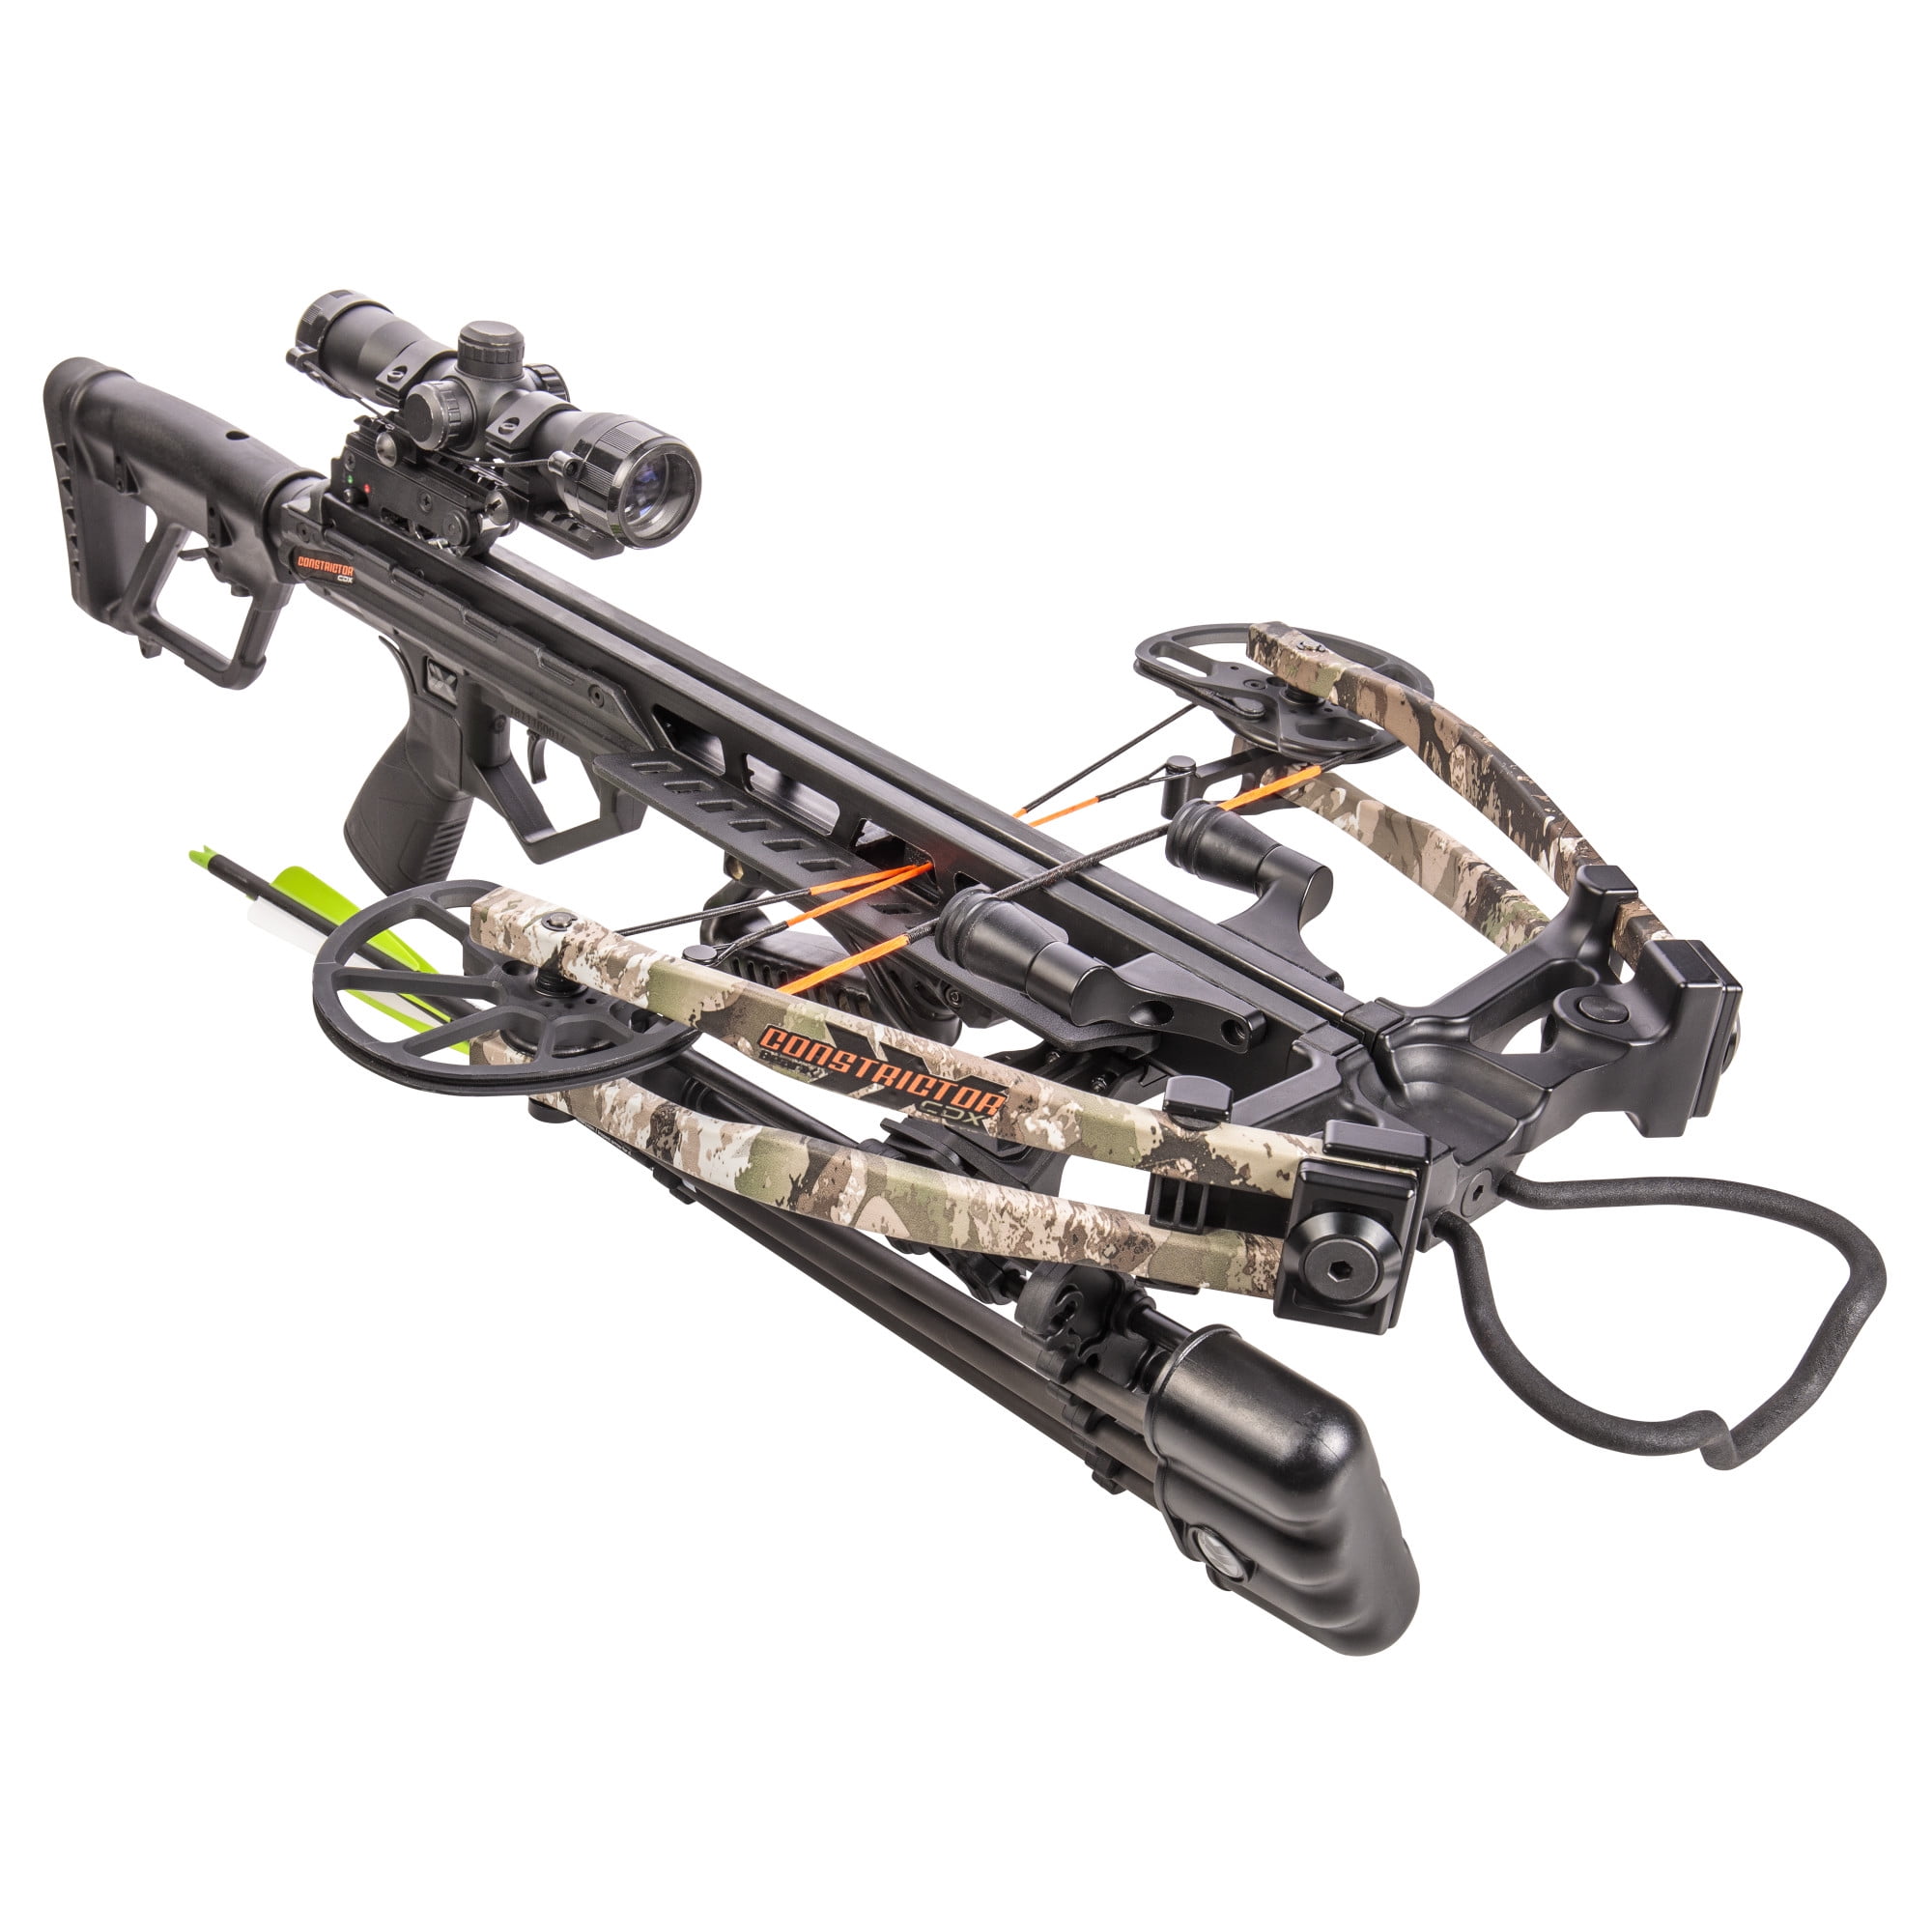 New Centerpoint Archery CP400 Narrow Crossbow Soft Case Model #AXCNBG 